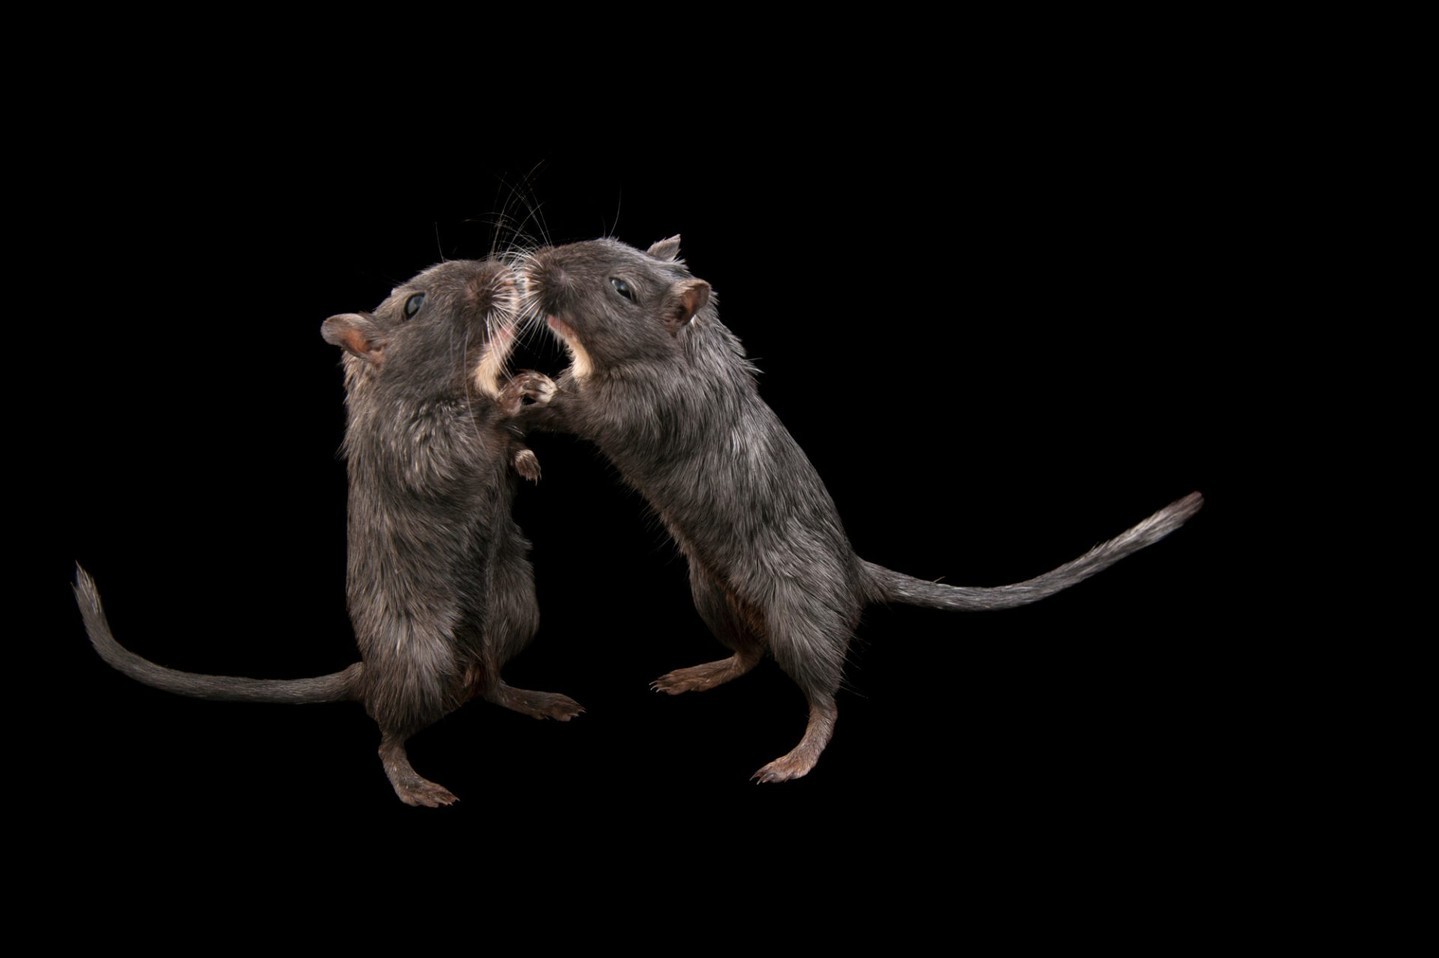 Photo by joelsartore | Who knew two rodents could be so cute? Bu